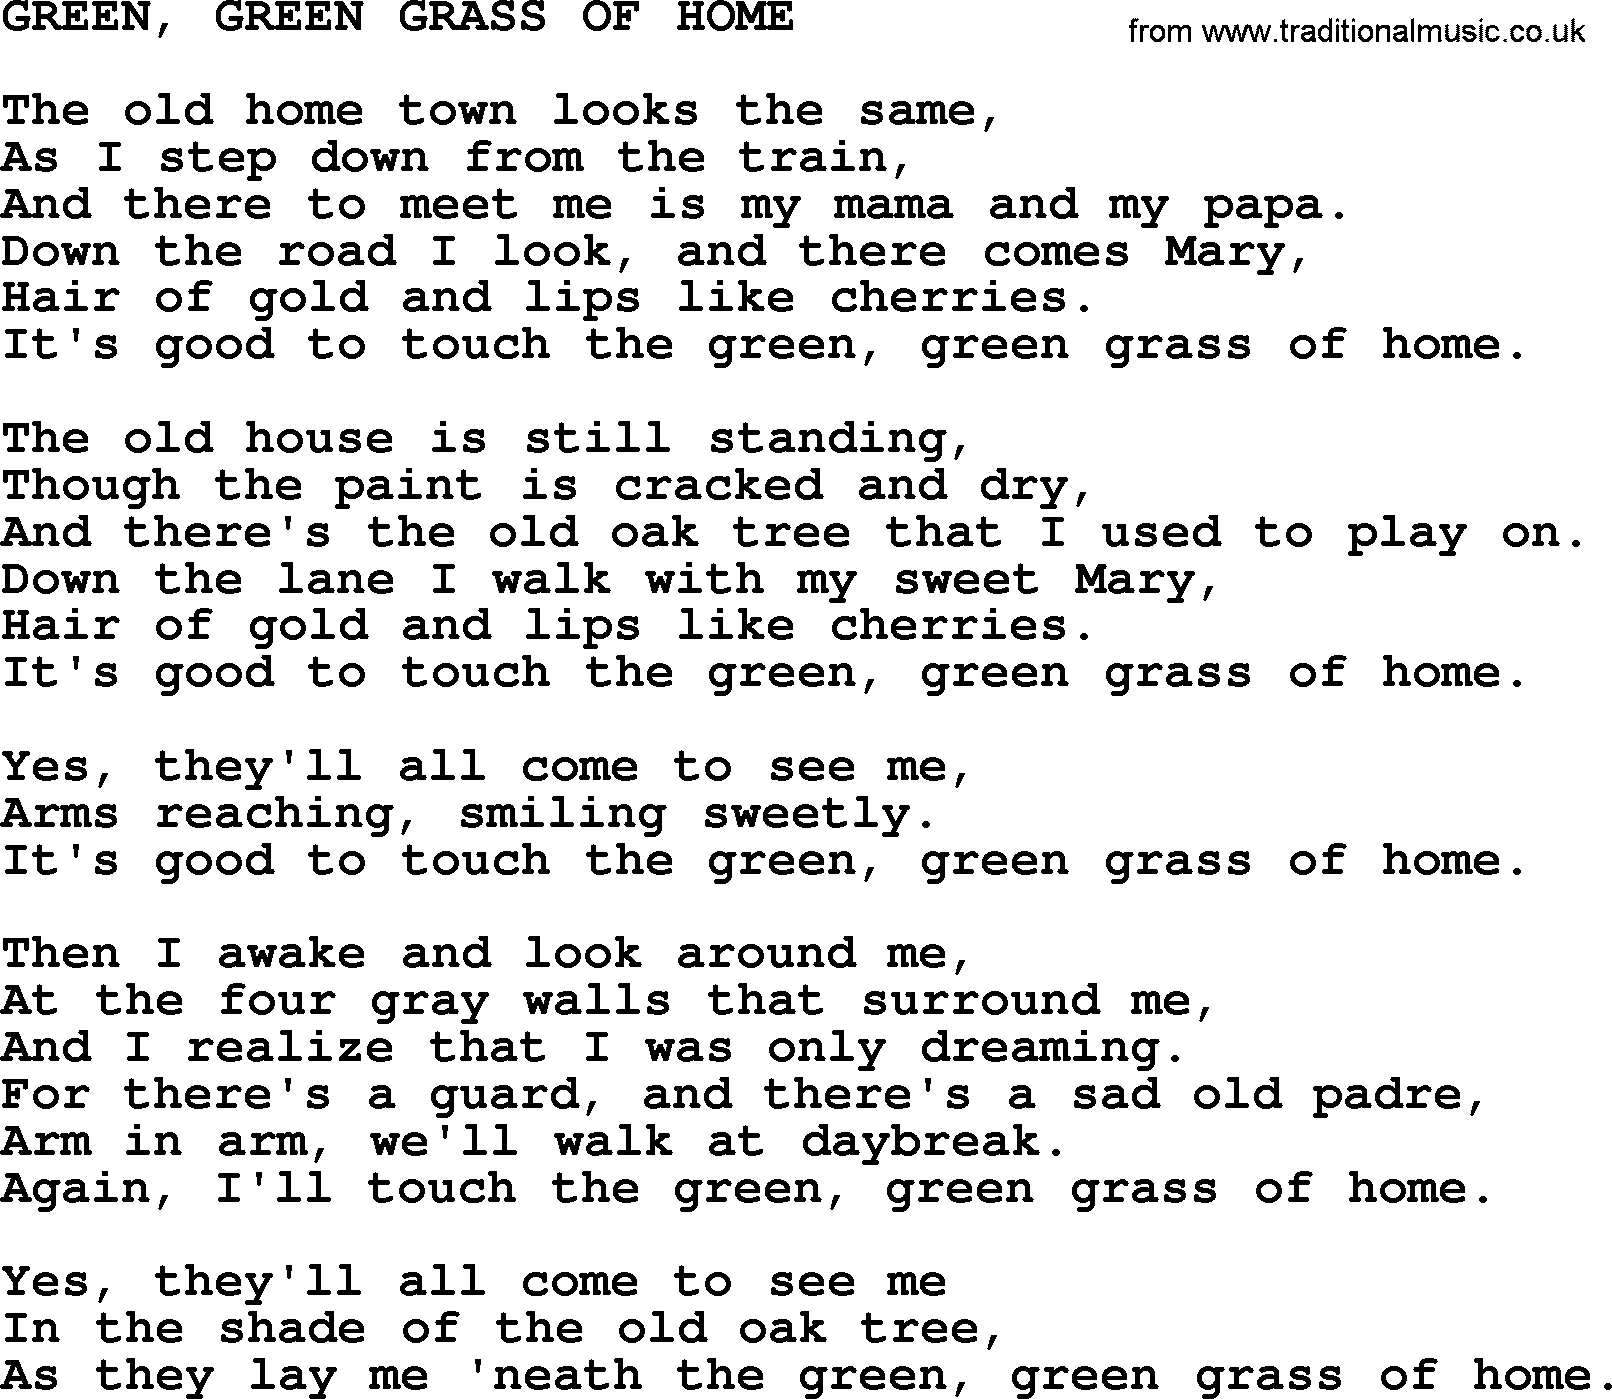 Johnny Cash song Green Green Grass Of Home, lyrics and chords